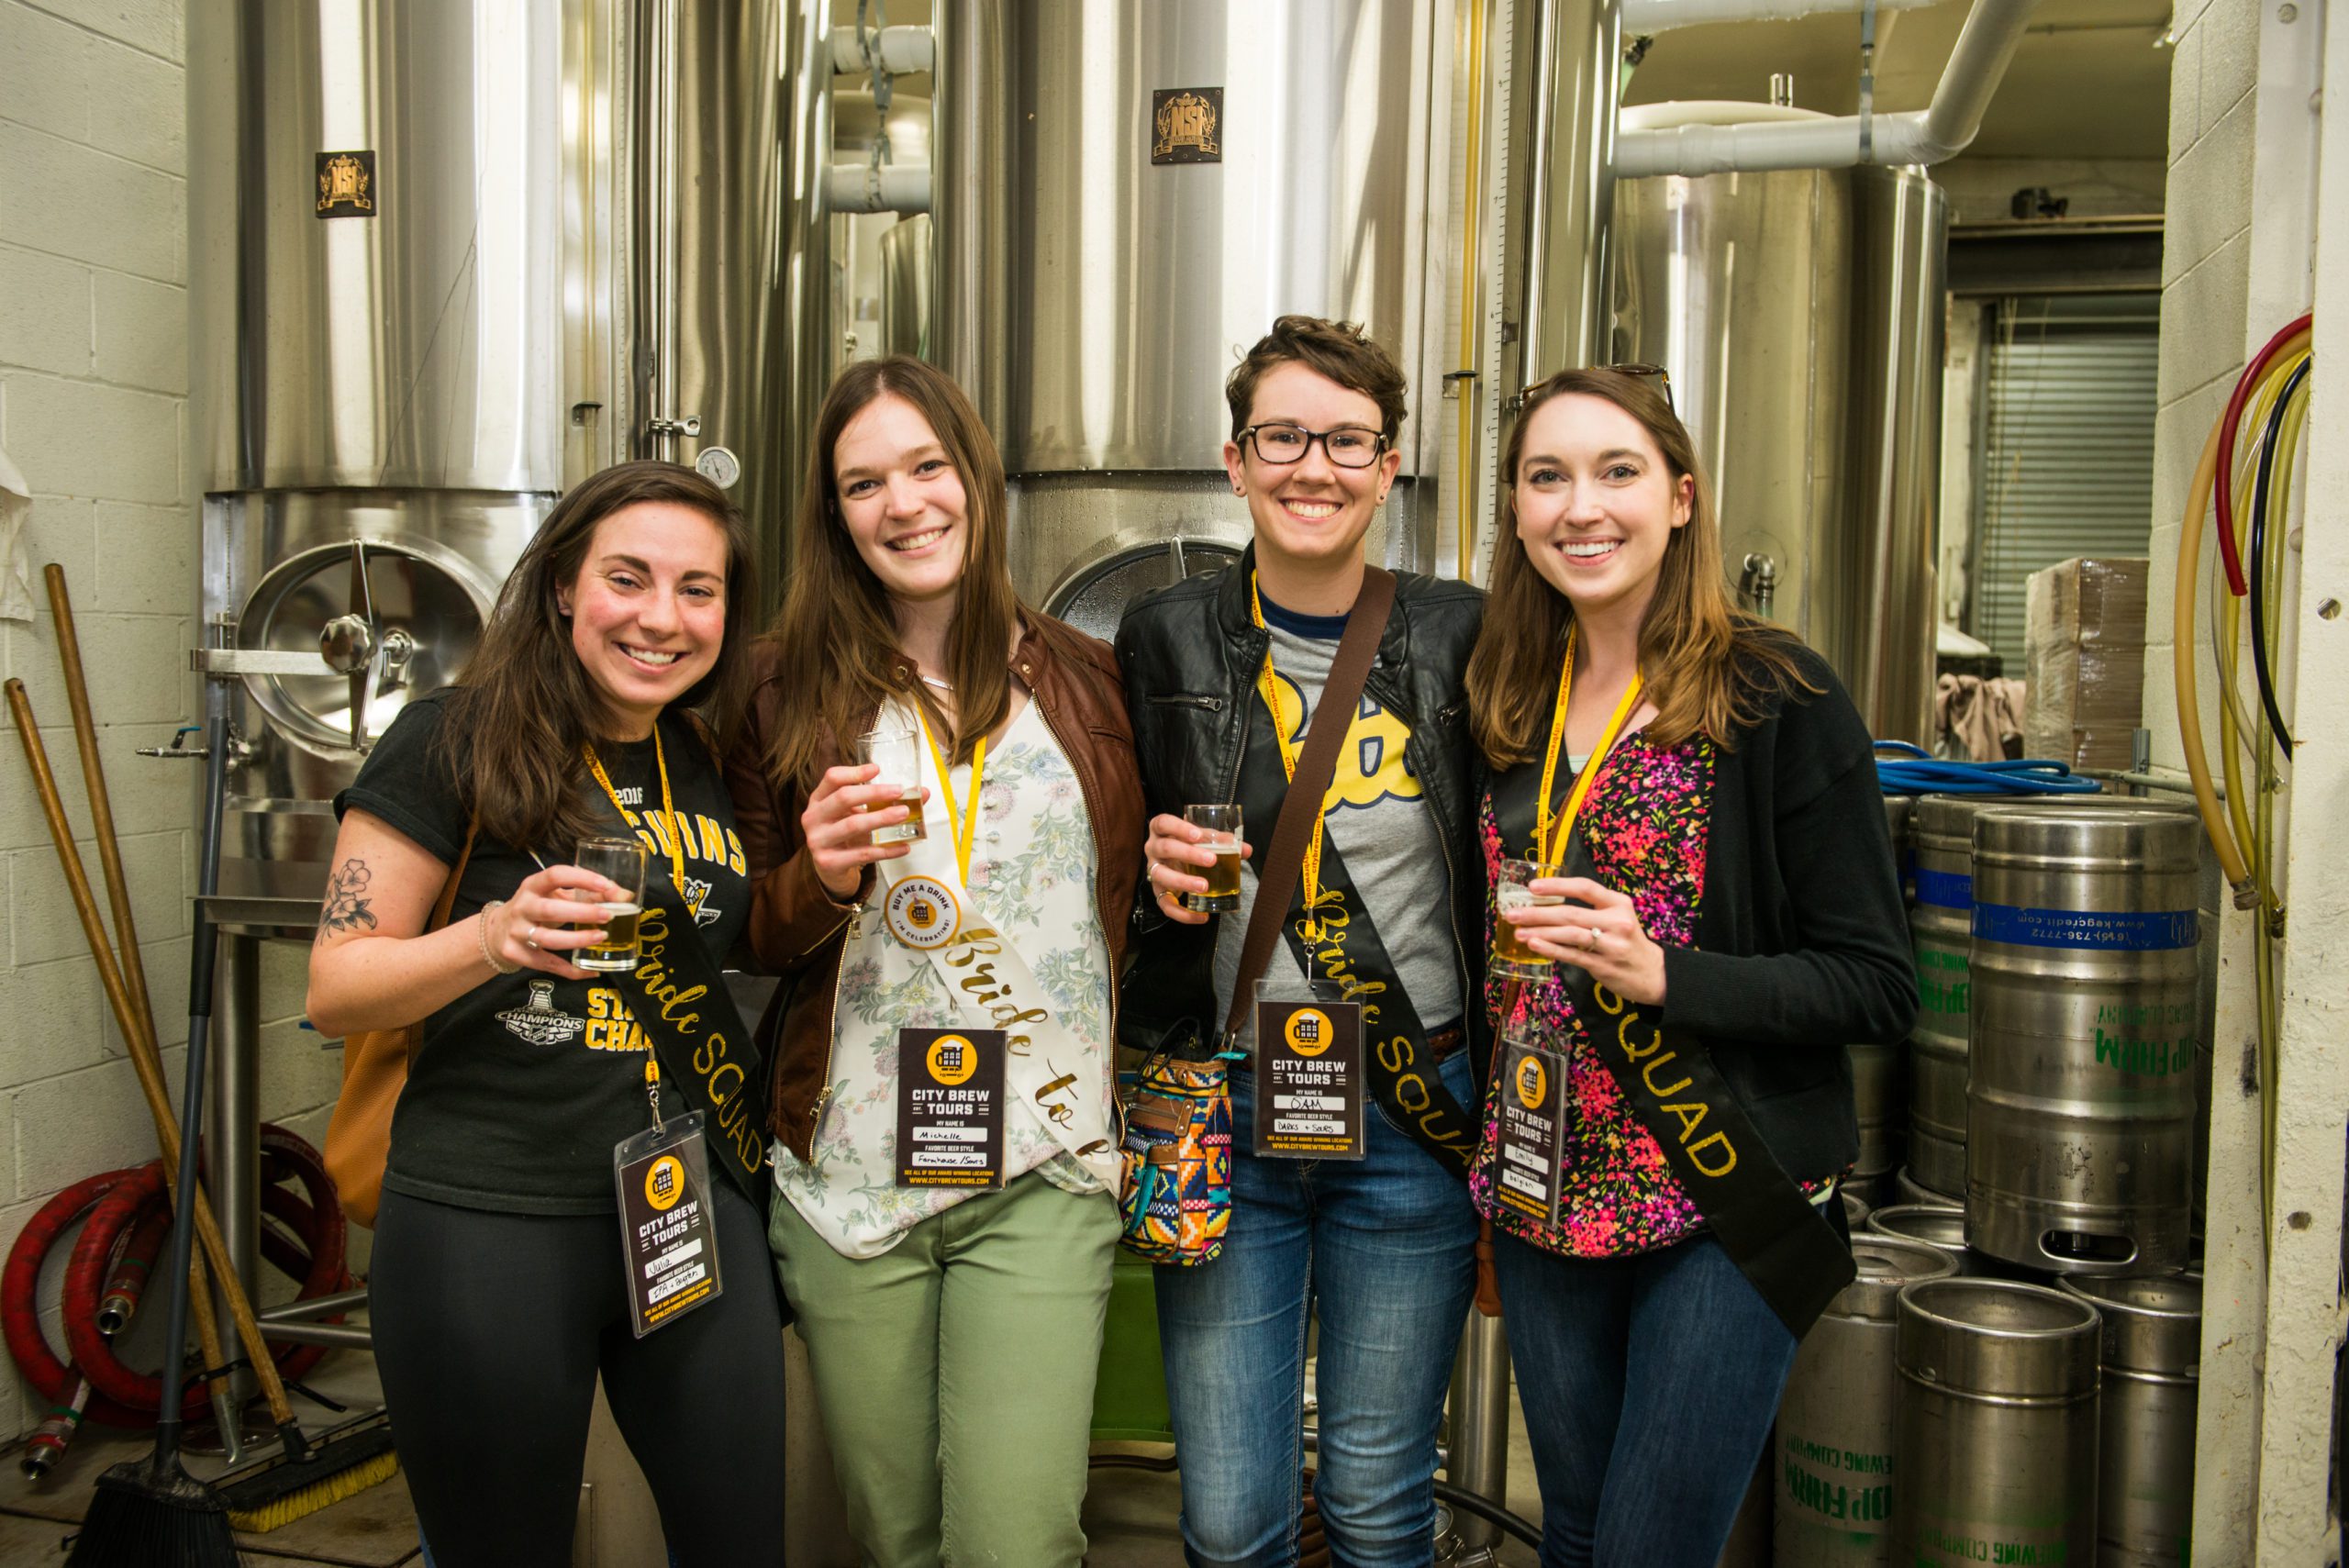 A City Brew Tours bachelorette group poses with beers in hand